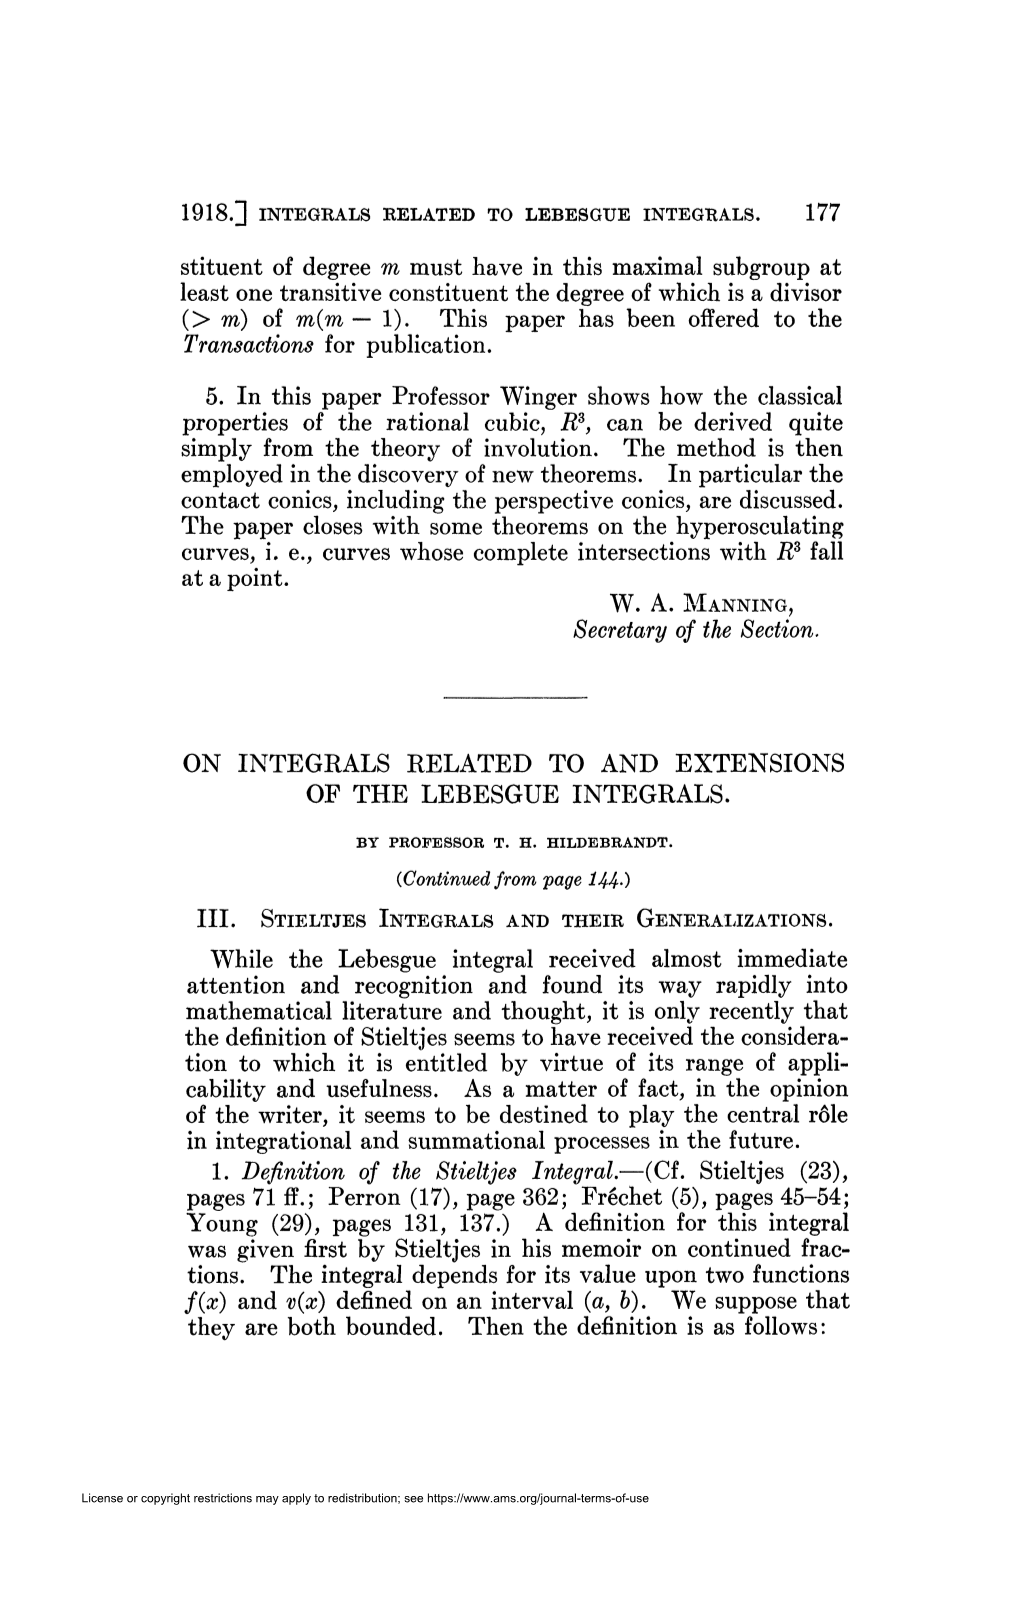 1918.] Integrals Related to Lebesgue Integrals. 177